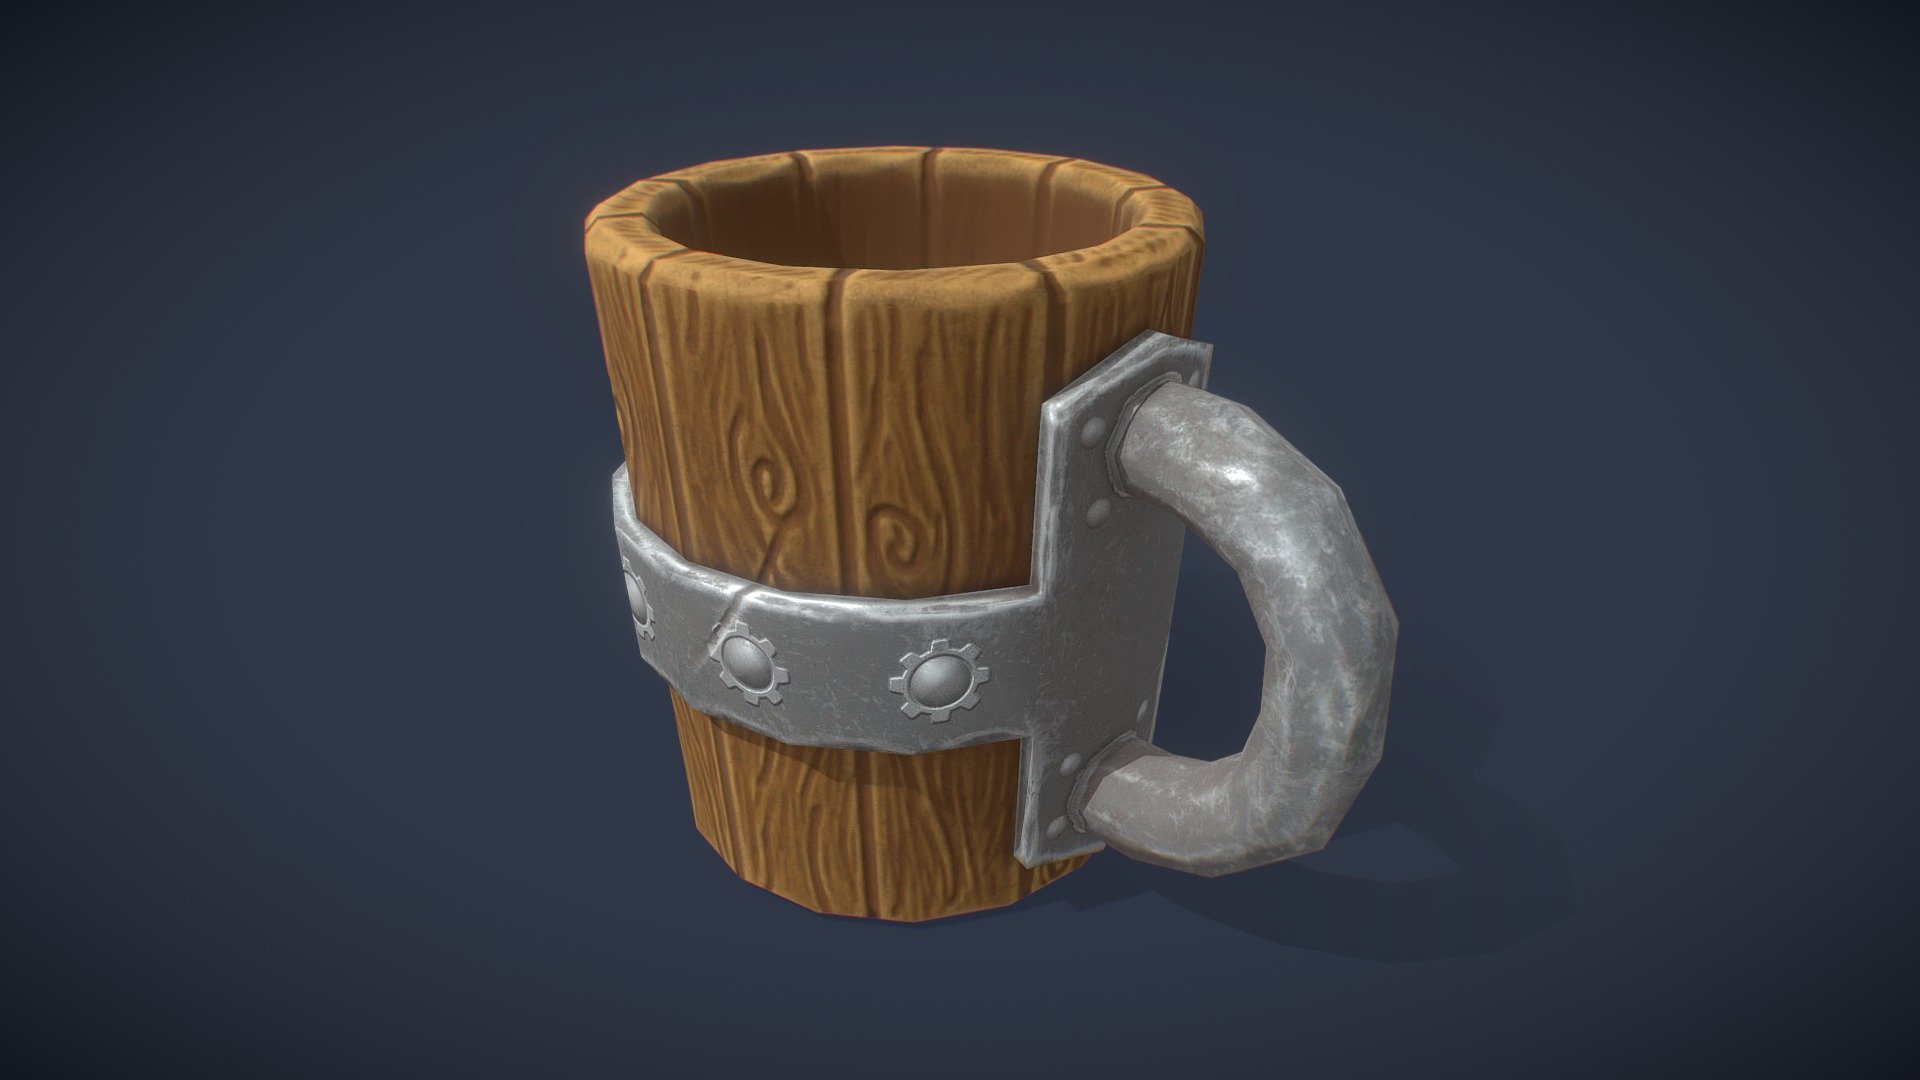 Simple lowpoly model of fantasy wooden cup - Fantasy wooden cup - 3D model by Sir Erdees (@sirerdees) 3d model